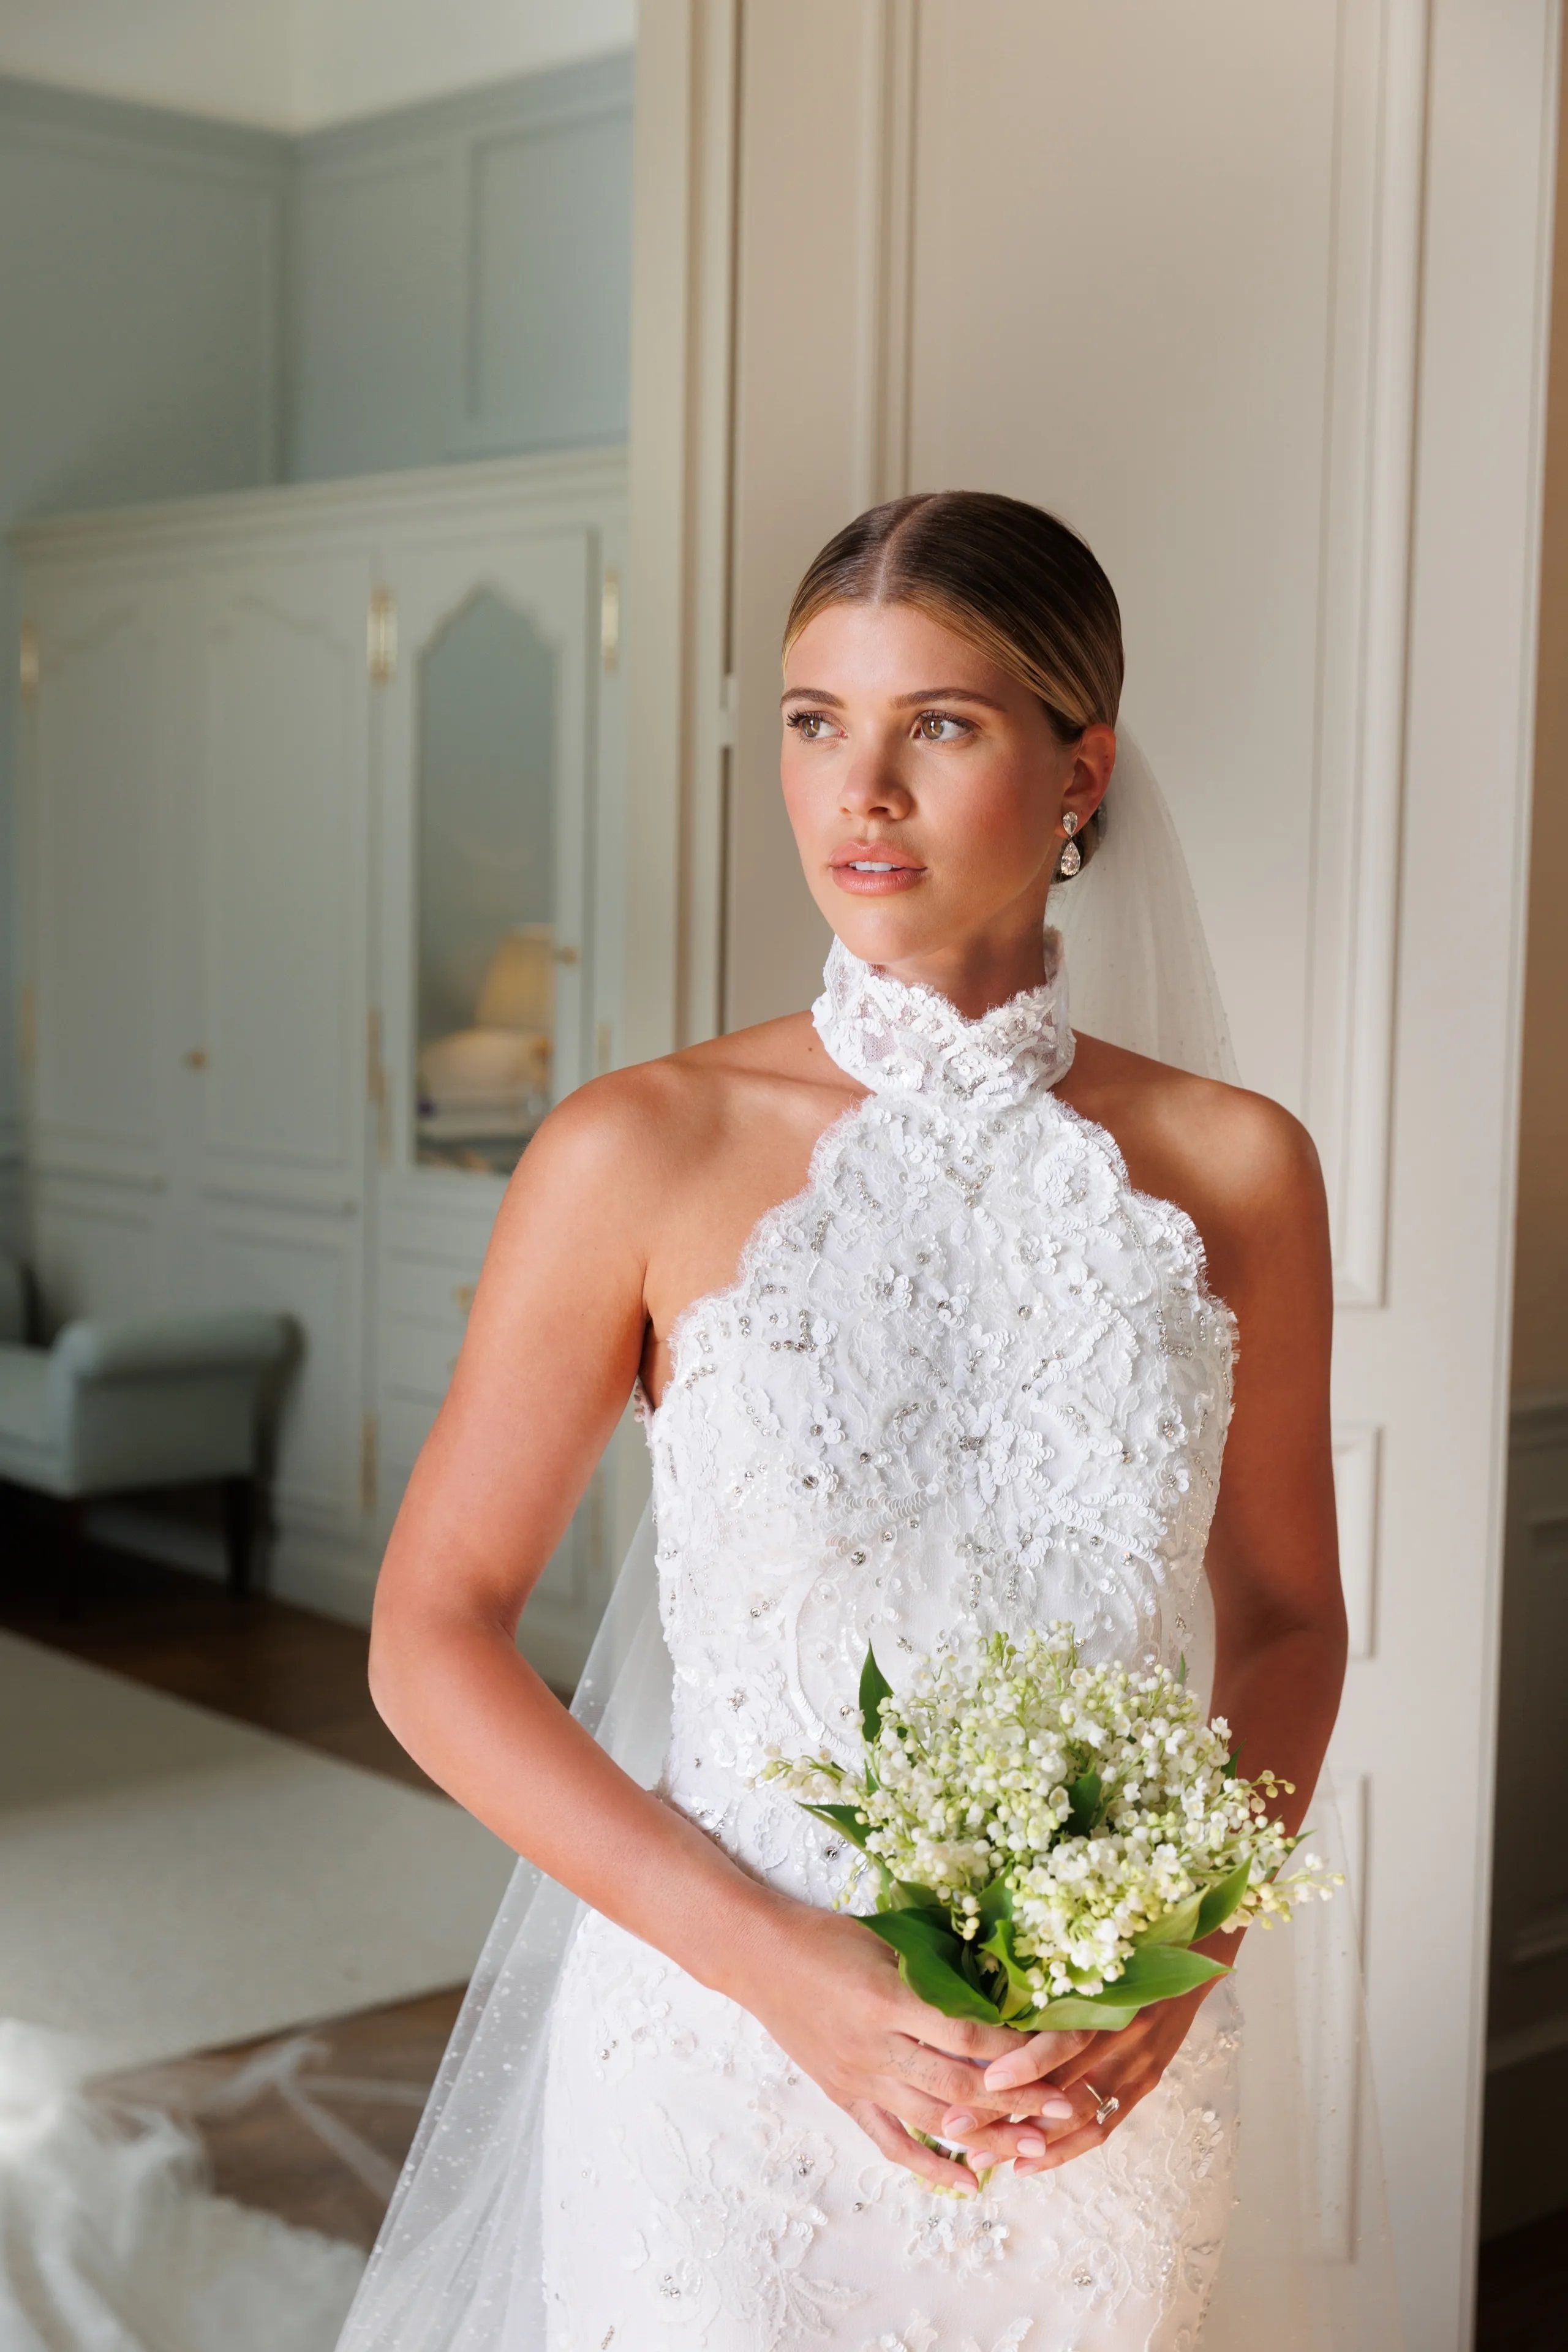 Set a beauty timeline for a fairy-tale wedding, like Sofia Richie, who had a months-long build-up including facials and therapies ahead of her big day. Photo: Handout